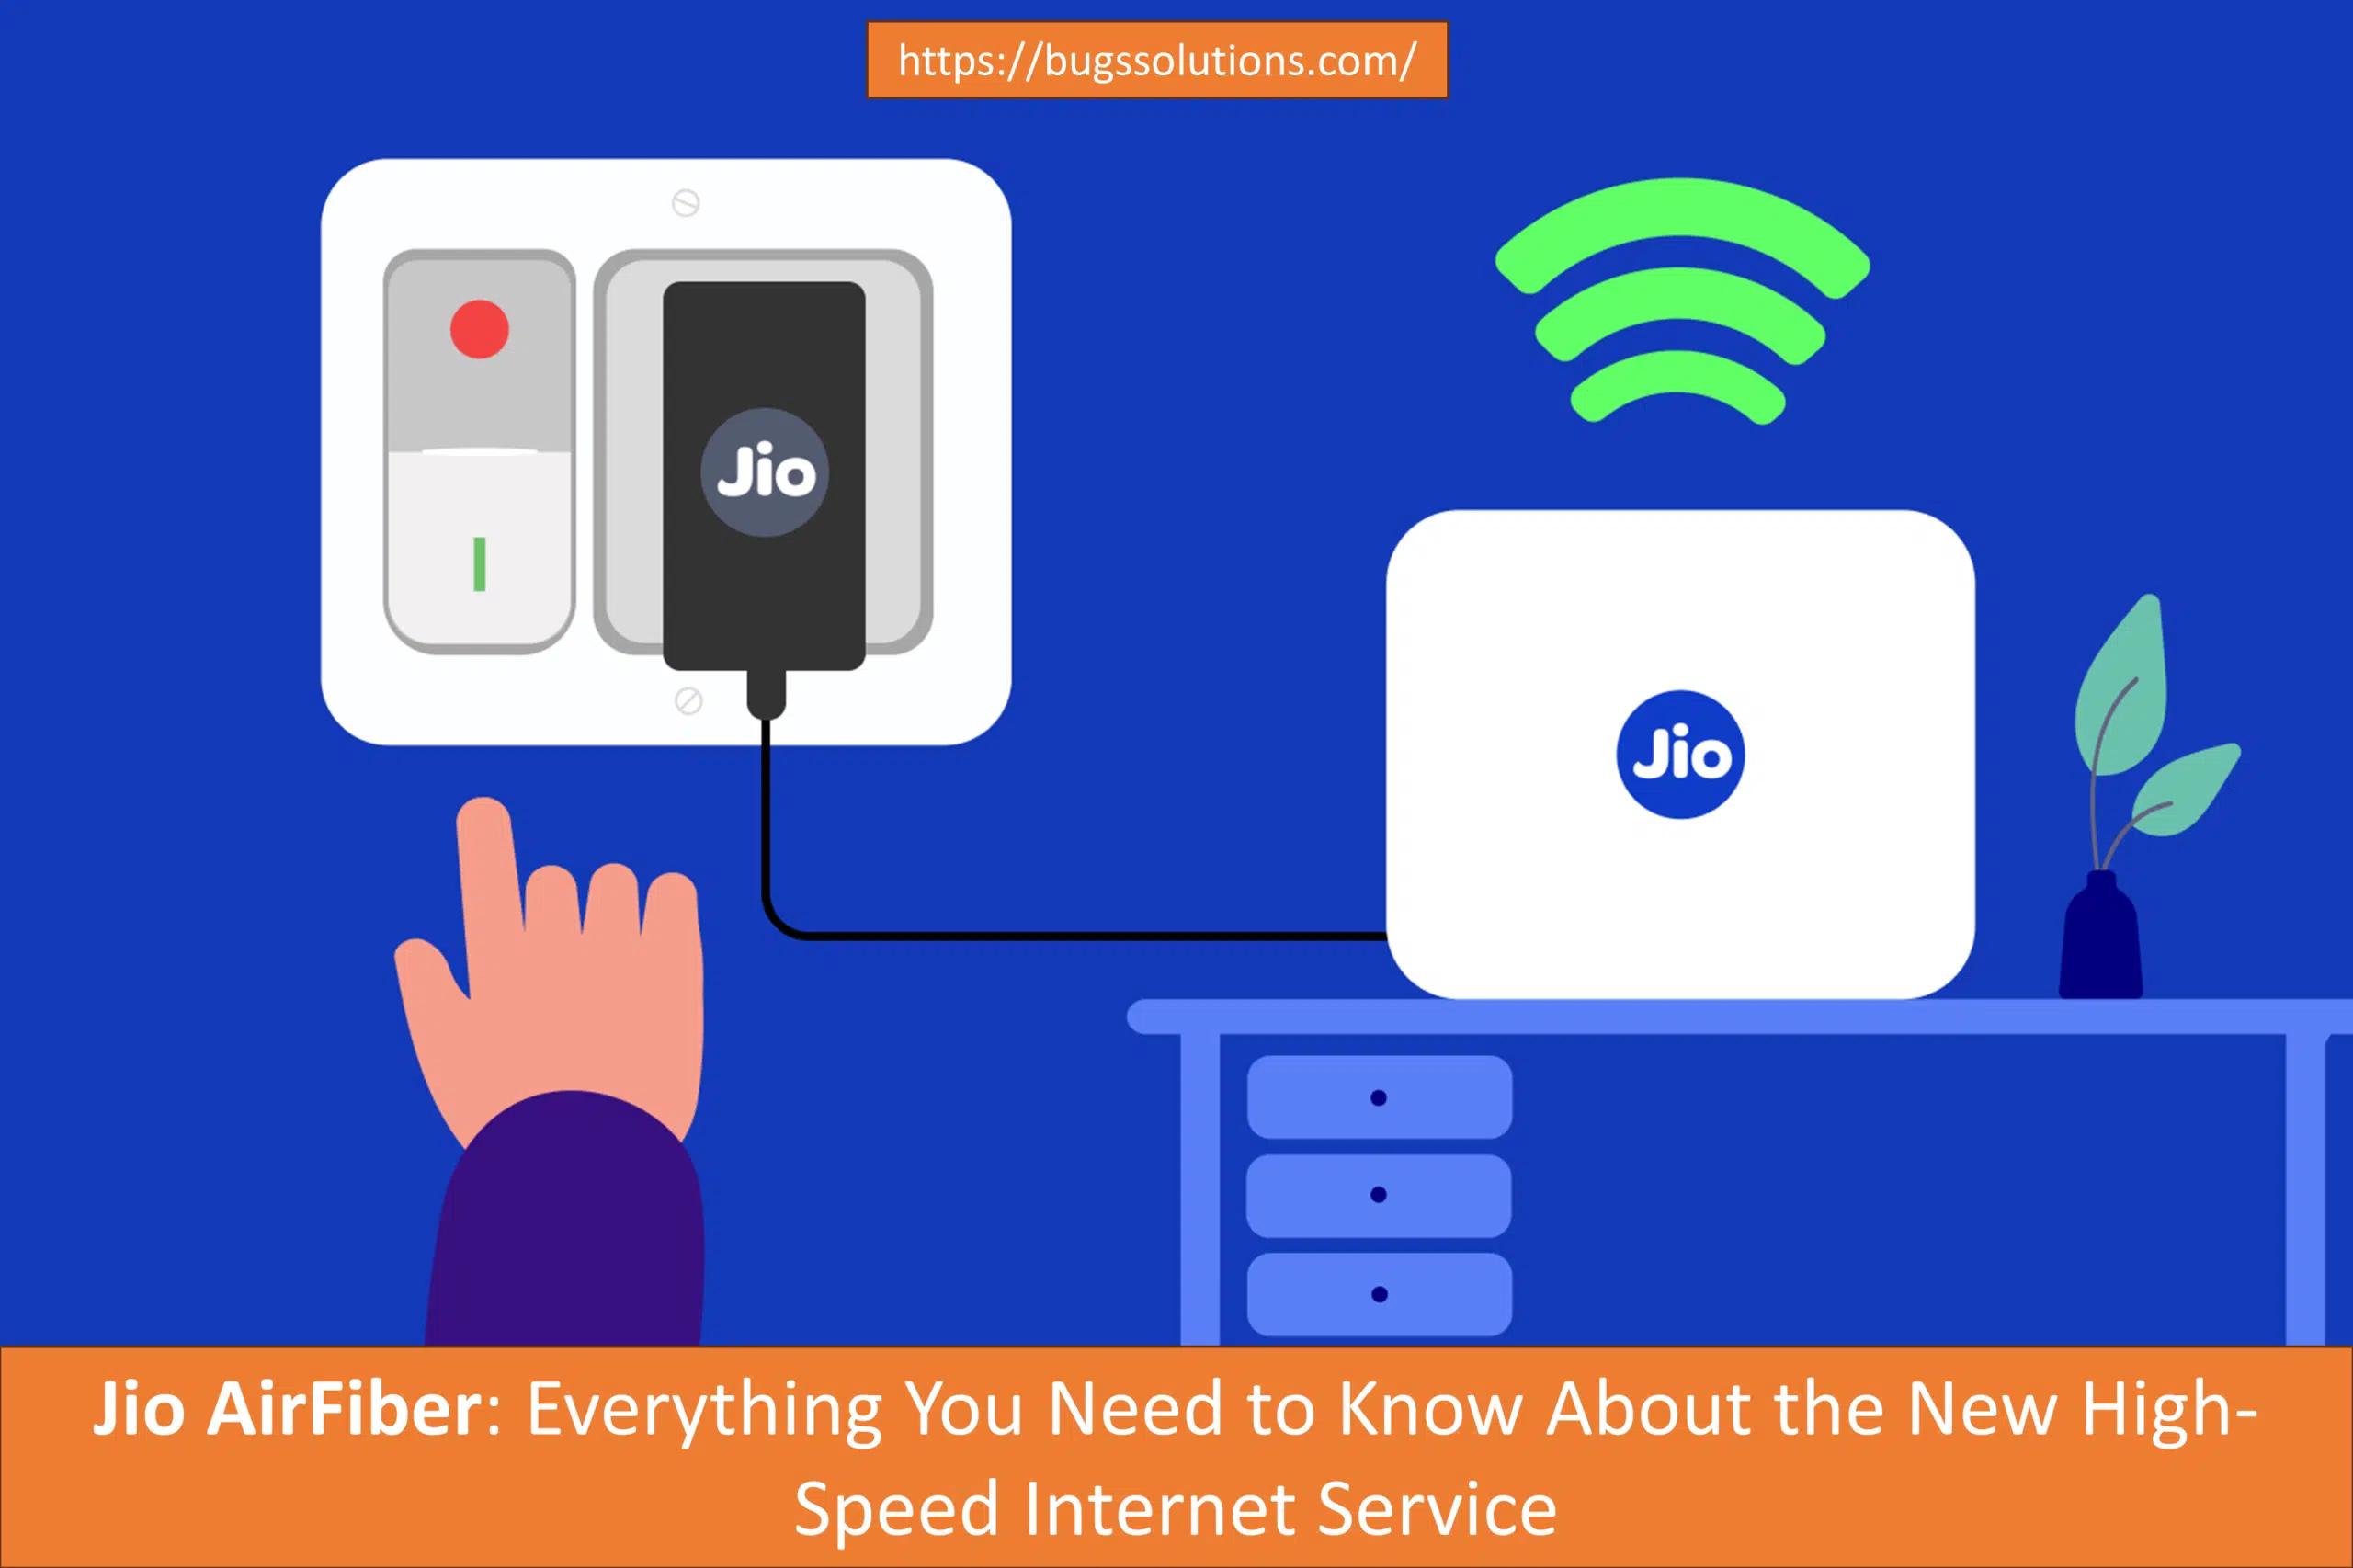 Jio AirFiber: Everything You Need to Know About the New High-Speed Internet Service